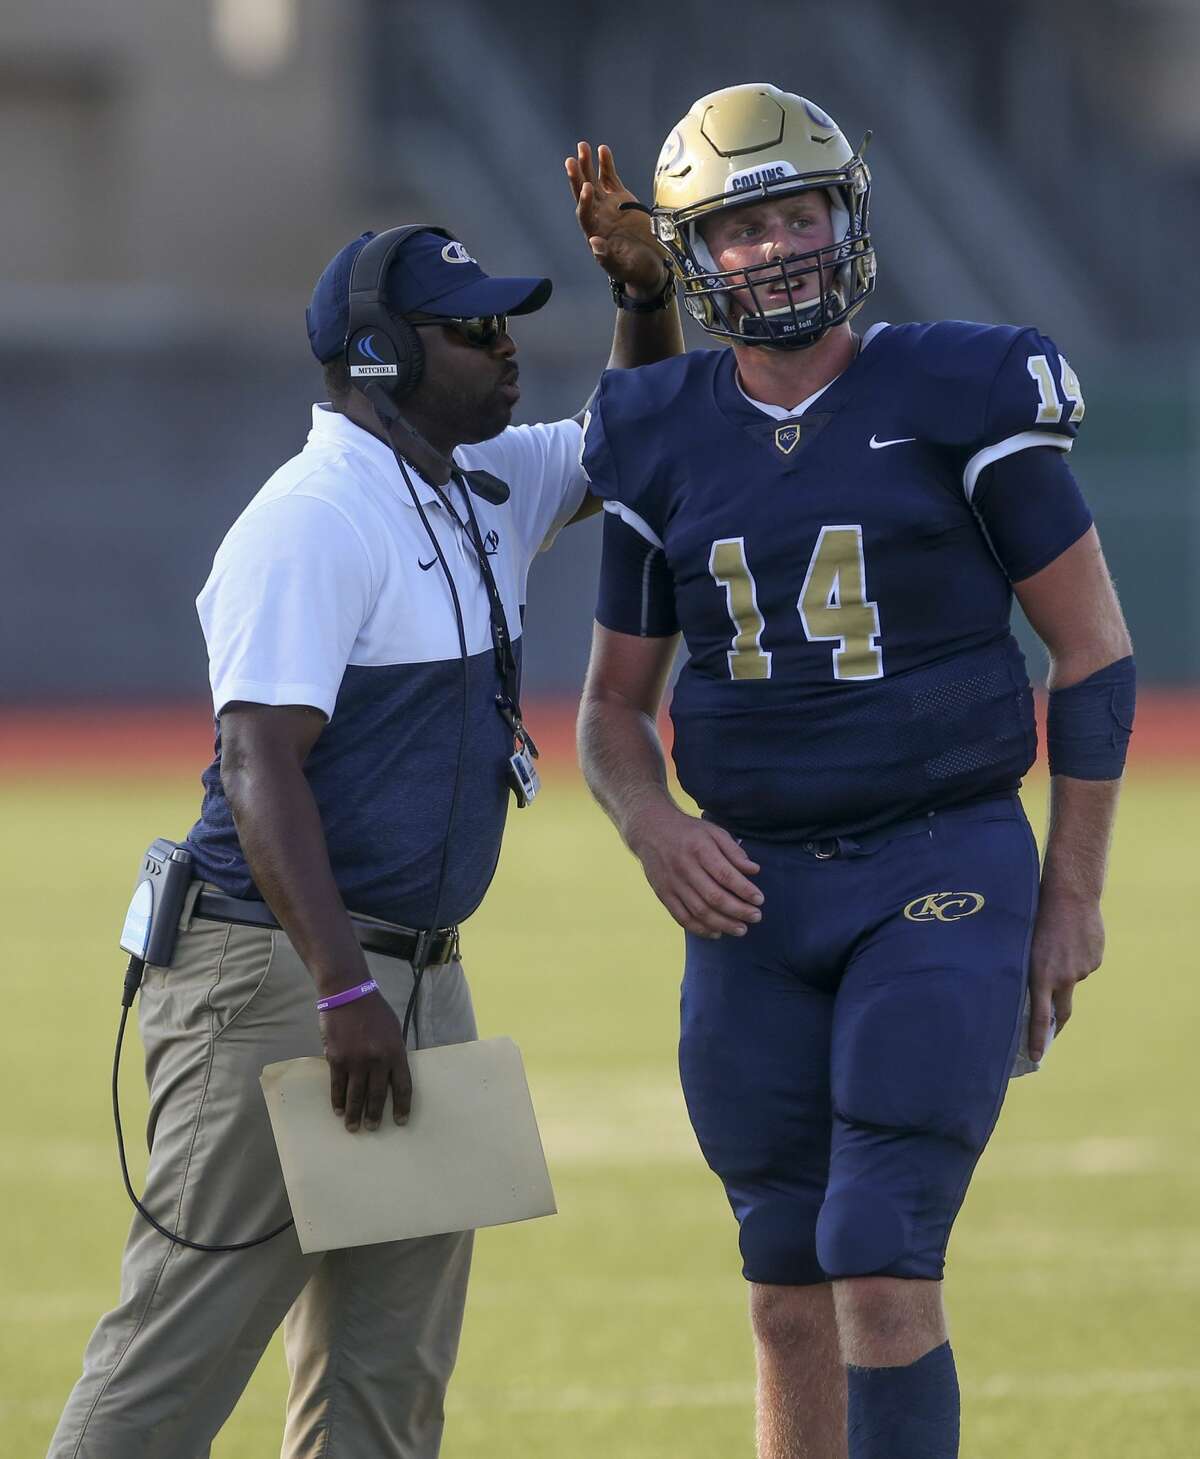 USA: TX: Spring: Klein Collins head football coach Adrian Mitchell talks to quarterback Colby Powers (14) while playing against Clear Springs in the second quarter at Memorial Stadium on September 7, 2019 in Spring, TX.